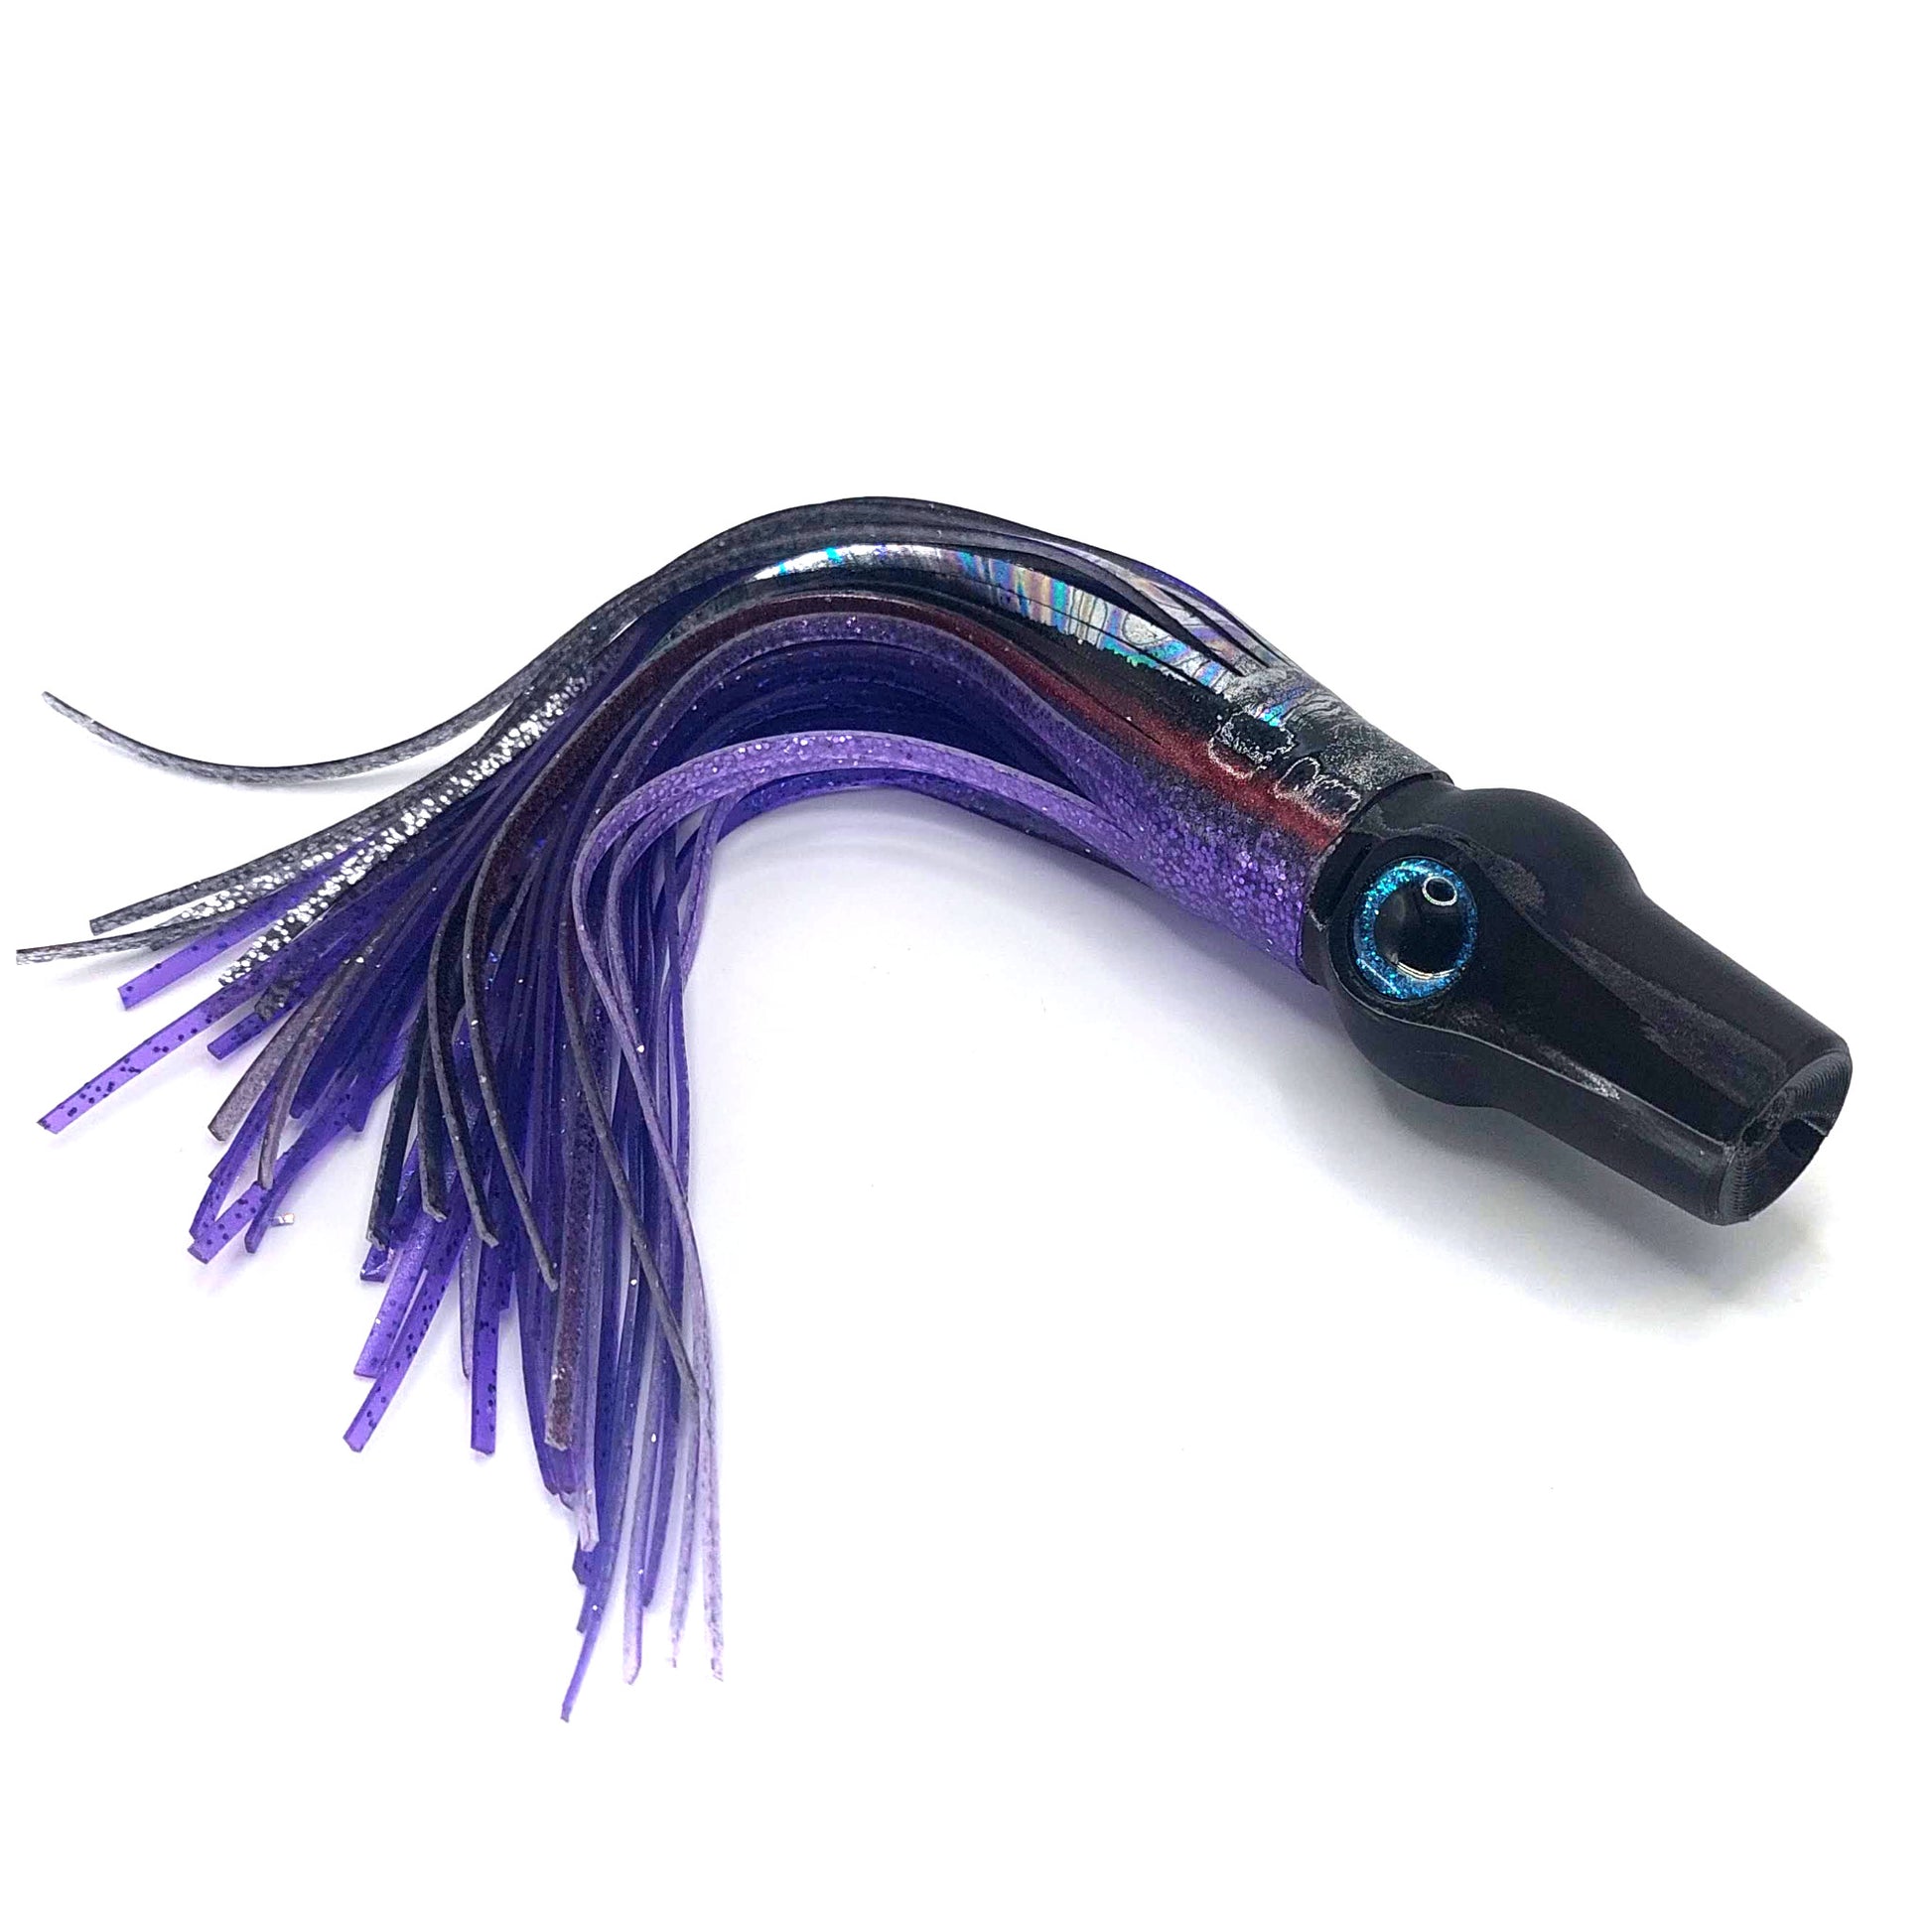 The Fujo S3.5 11 Offshore Trolling Lure